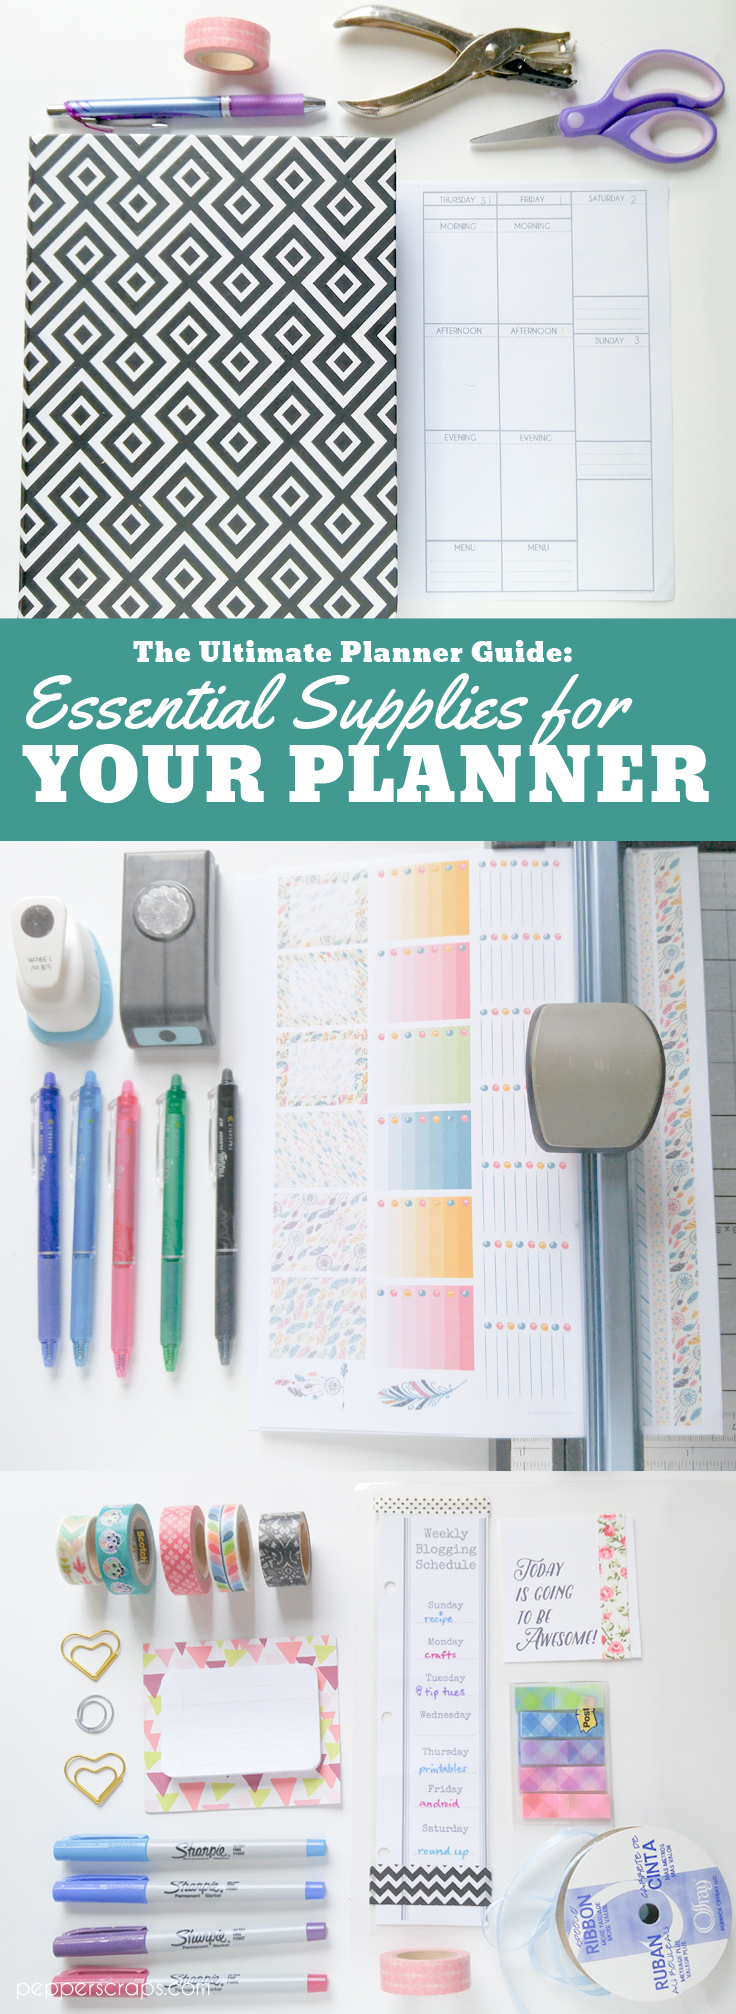 The Ultimate Planner Supplies Guide